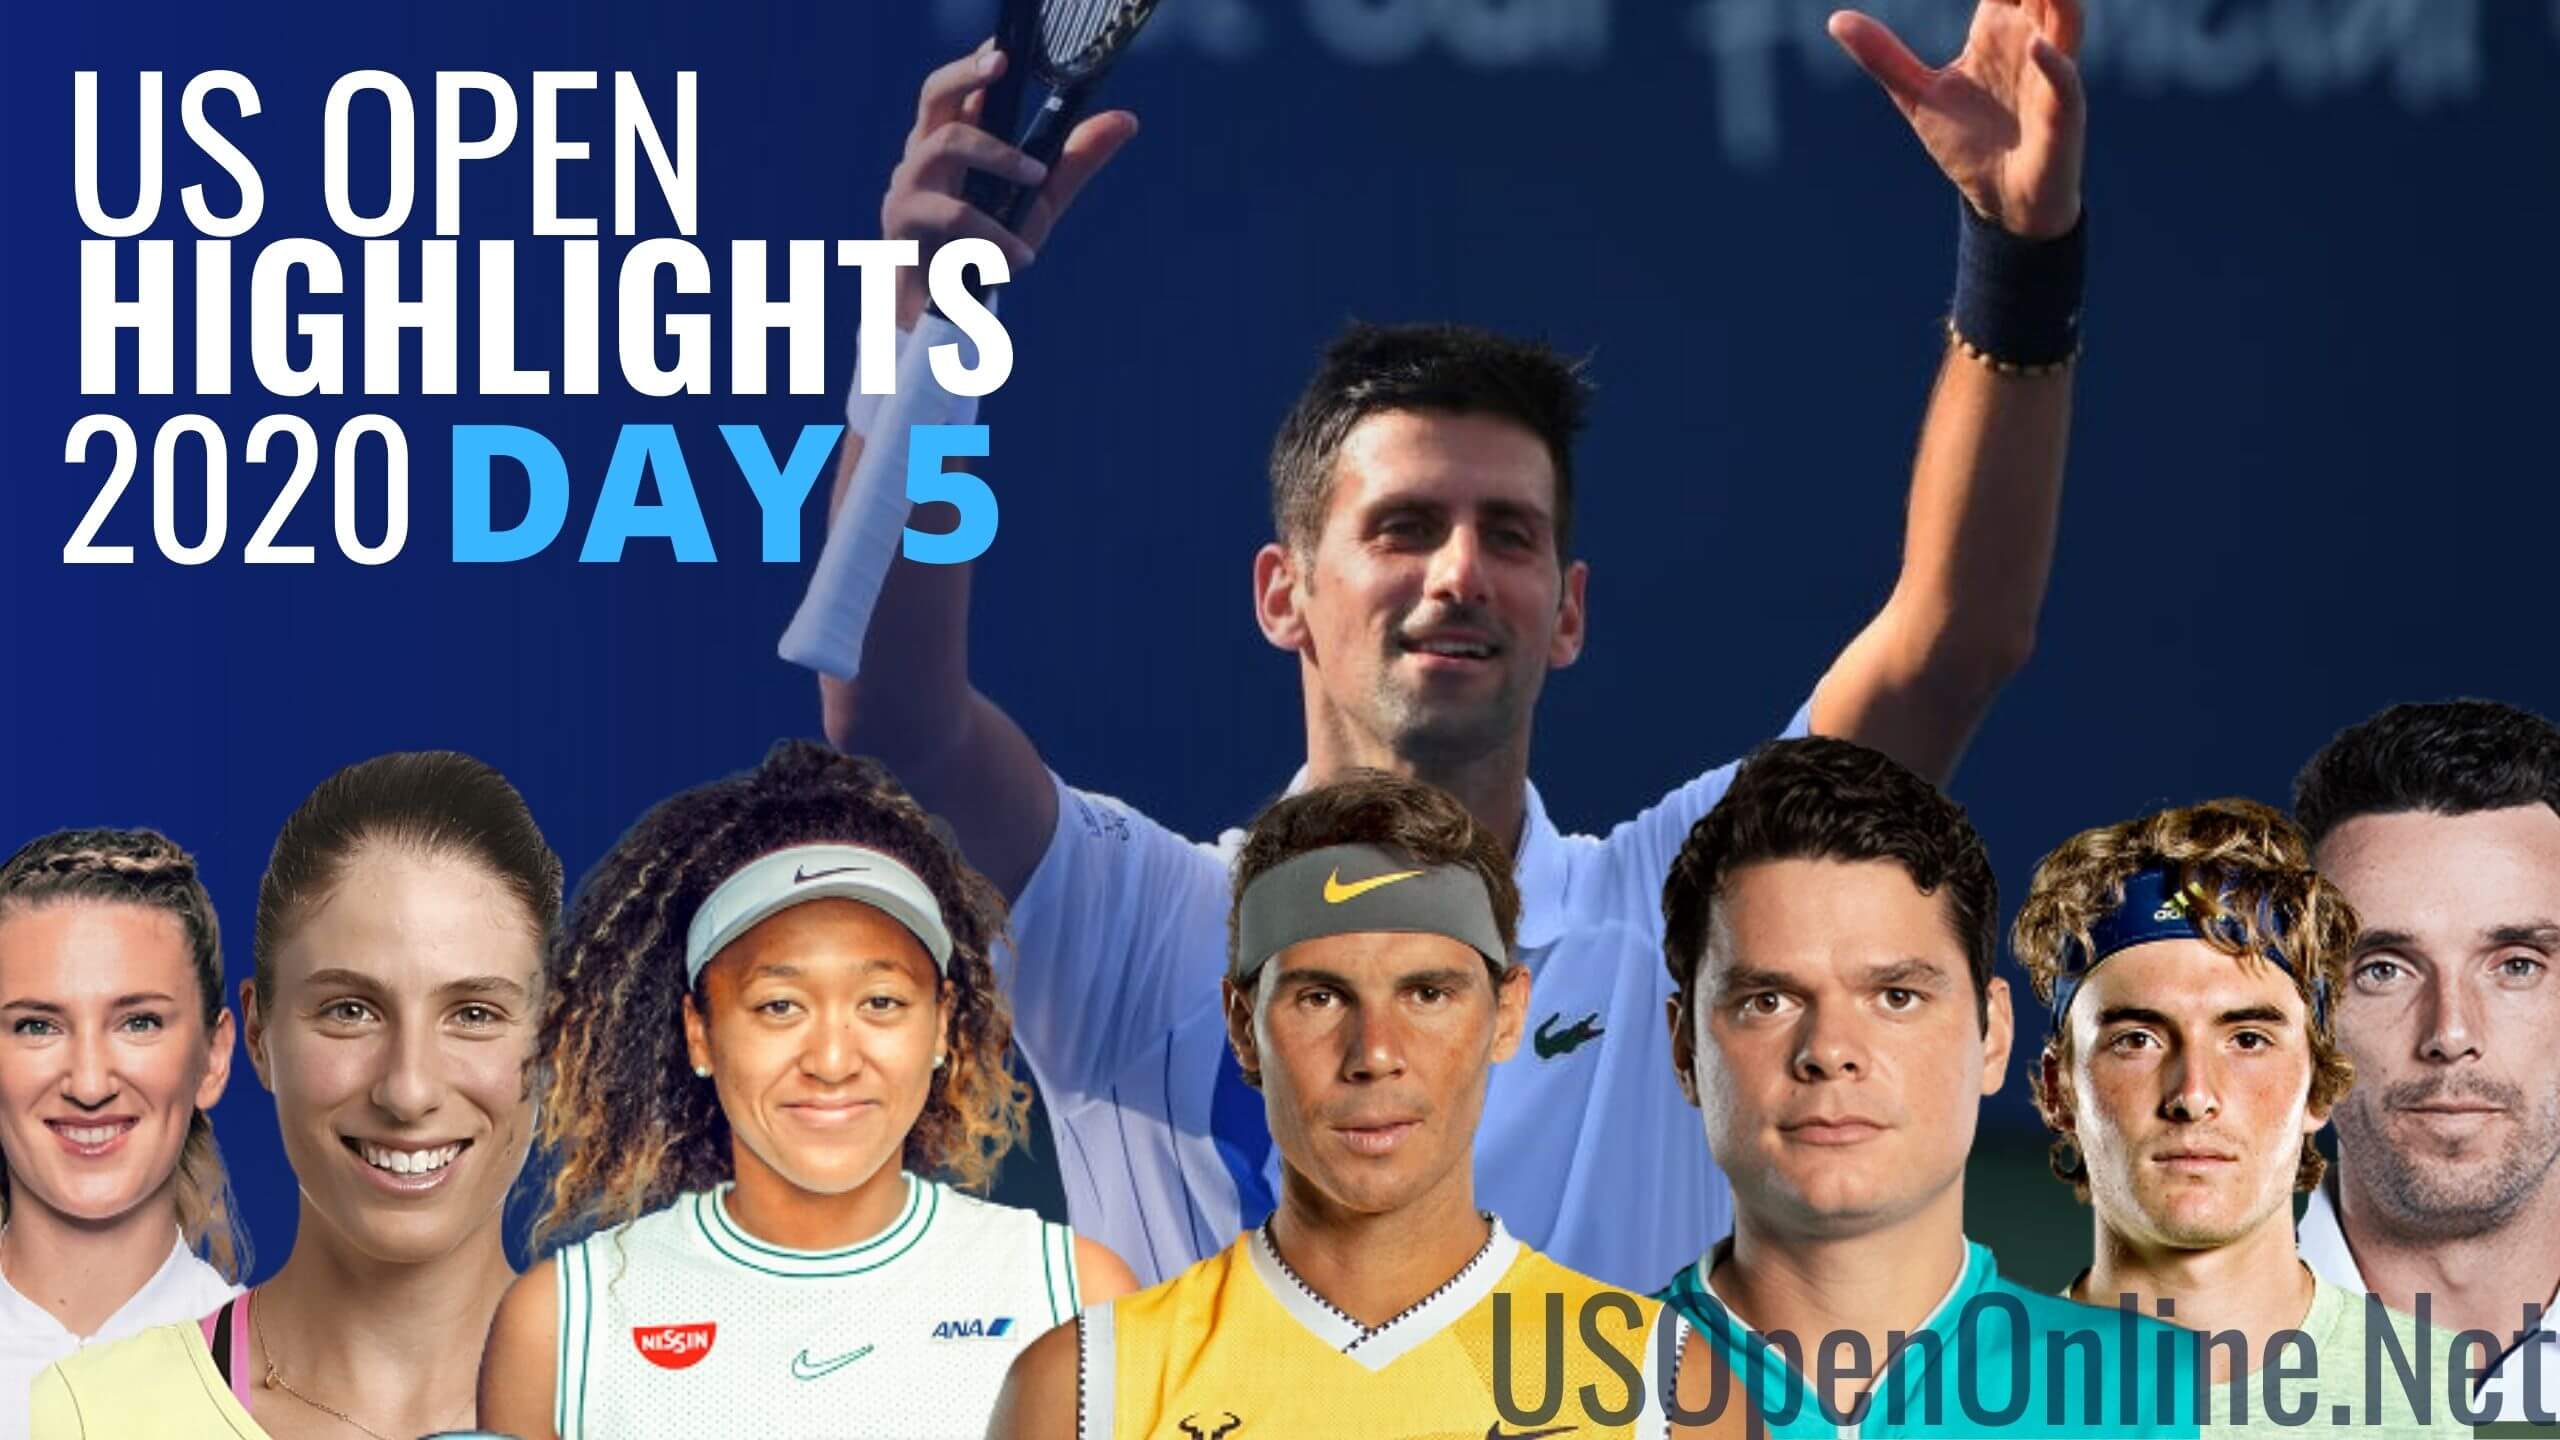 US Open Tennis 2020 Day 5 Complete Match Highlights